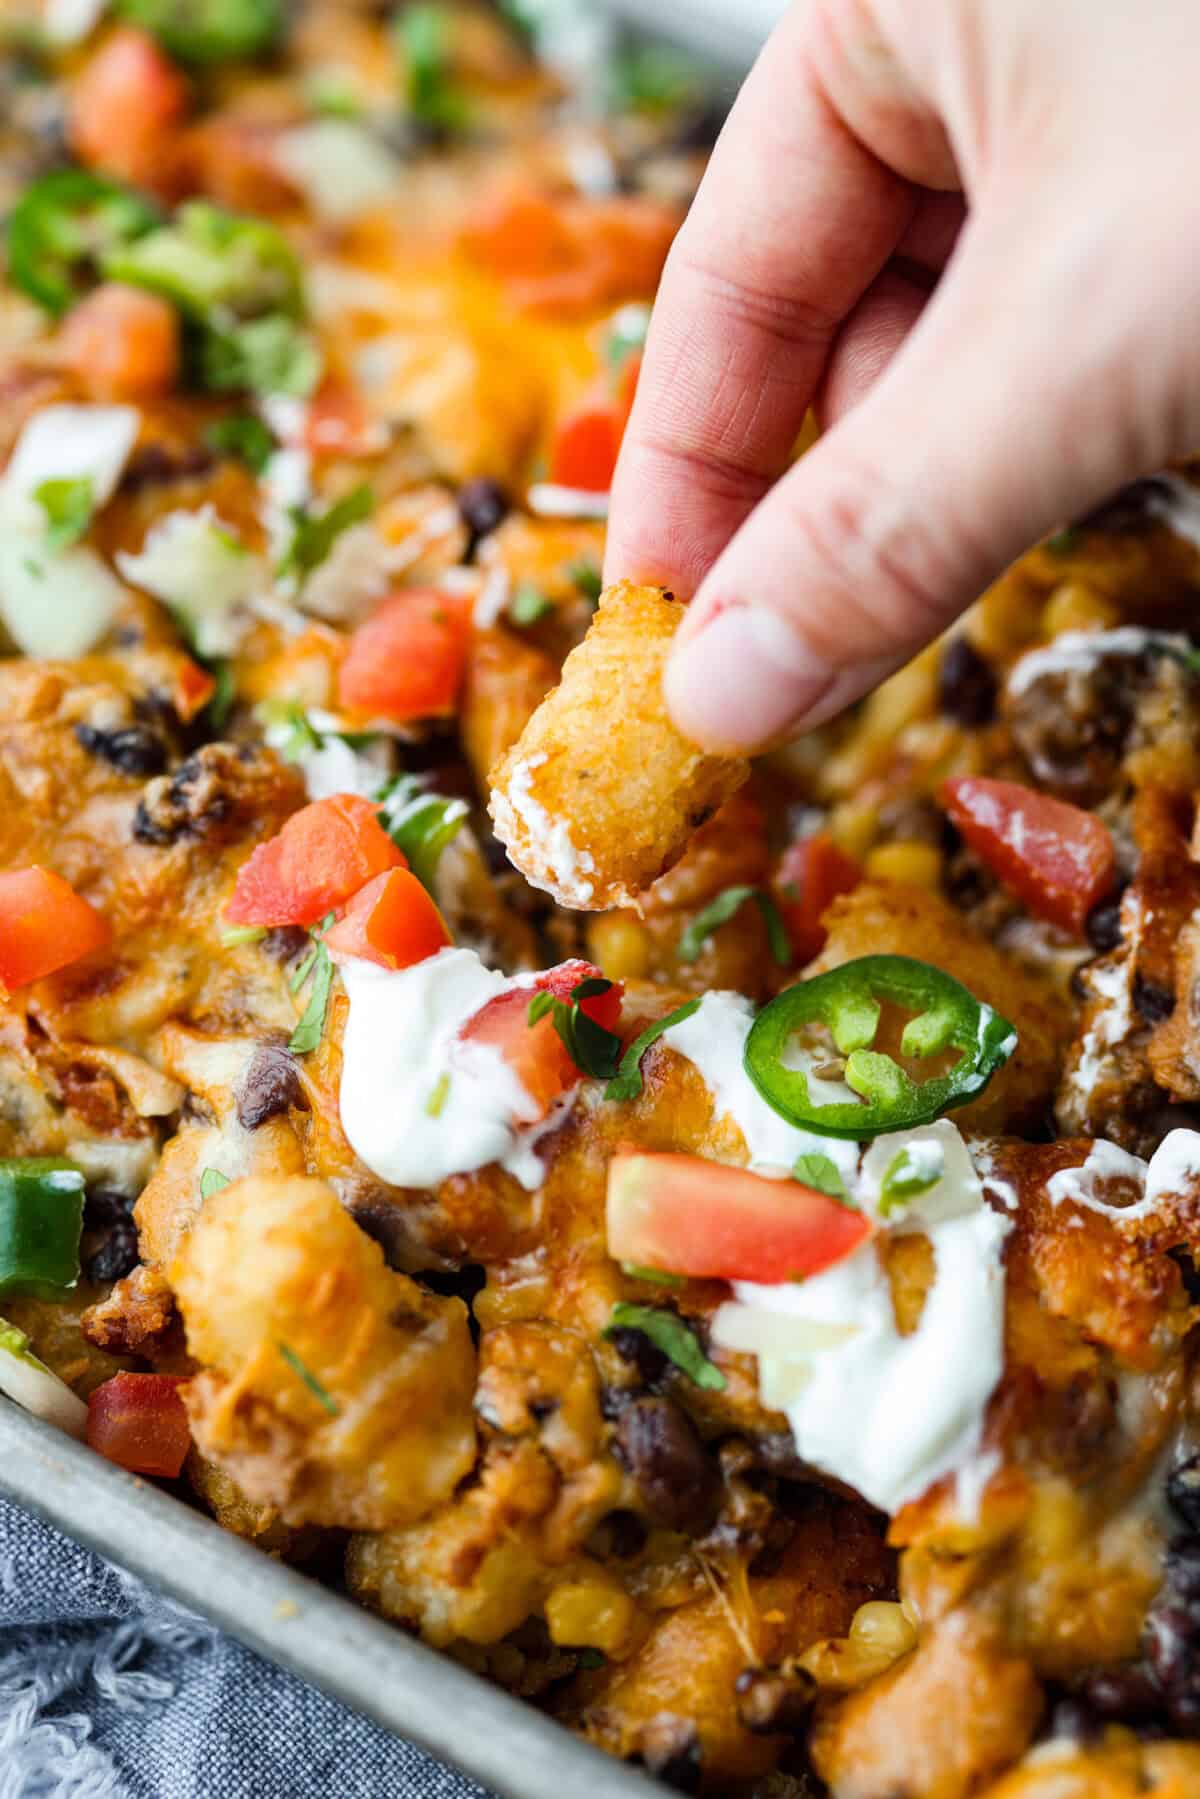 Angle shot of someone dipping a tater tot into the sour cream on that is drizzled on top of the pan of totchos. 